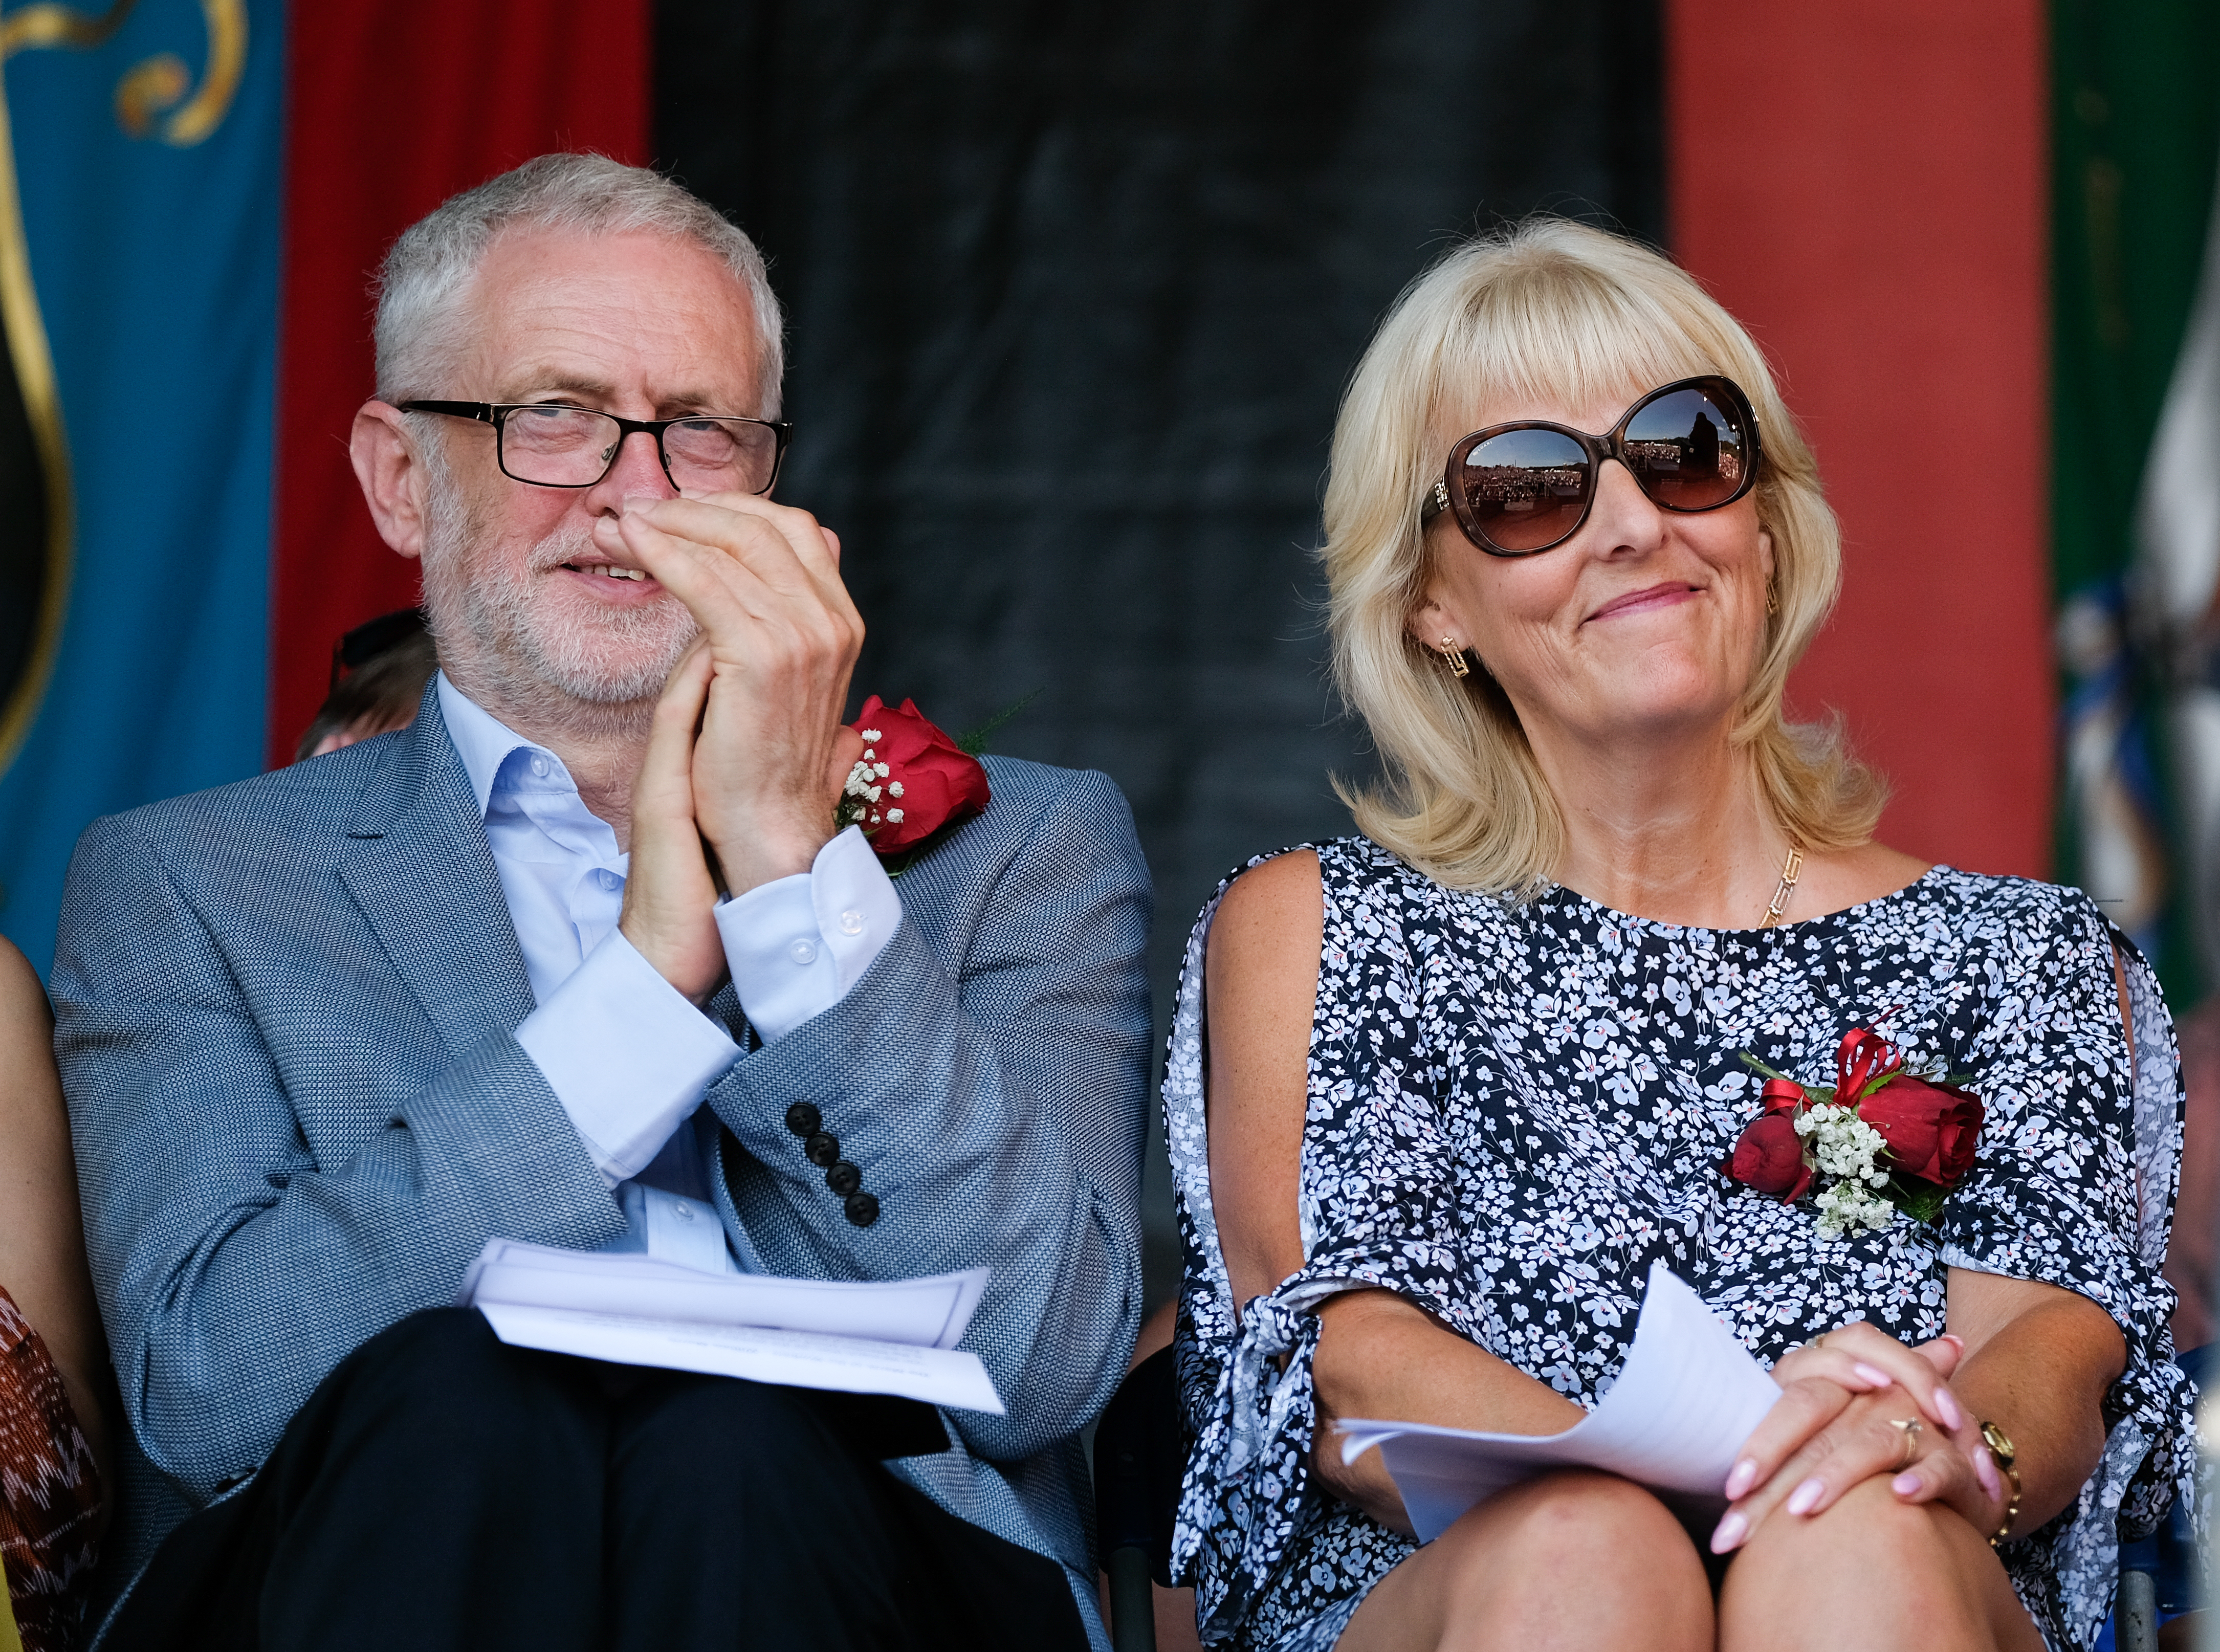 DURHAM, ENGLAND - JULY 14: Labour leader Jeremy Corbyn applauds as he sits with Labour General Secretary Jennie Formby and listens to speeches during the 134th Durham Miners' Gala on July 14, 2018 in Durham, England. Over two decades after the last pit closed in the Durham coalfield the Miners Gala or Big Meeting as it is known locally remains as popular as ever with over 200,000 people expected to attend this year. The gala forms part of the culture and heritage of the area and represents the communal values of the North East of England. The gala sees traditional colliery brass bands march through the city ahead of their respective pit banners before pausing to play outside the County Hotel building where union leaders, invited guests and dignitaries gather before then continuing to the racecourse area for a day of entertainment and speeches. Beginning in 1871 the gala is the biggest trade union event in Europe and is part of an annual celebration of socialism.  (Photo by Ian Forsyth/Getty Images)